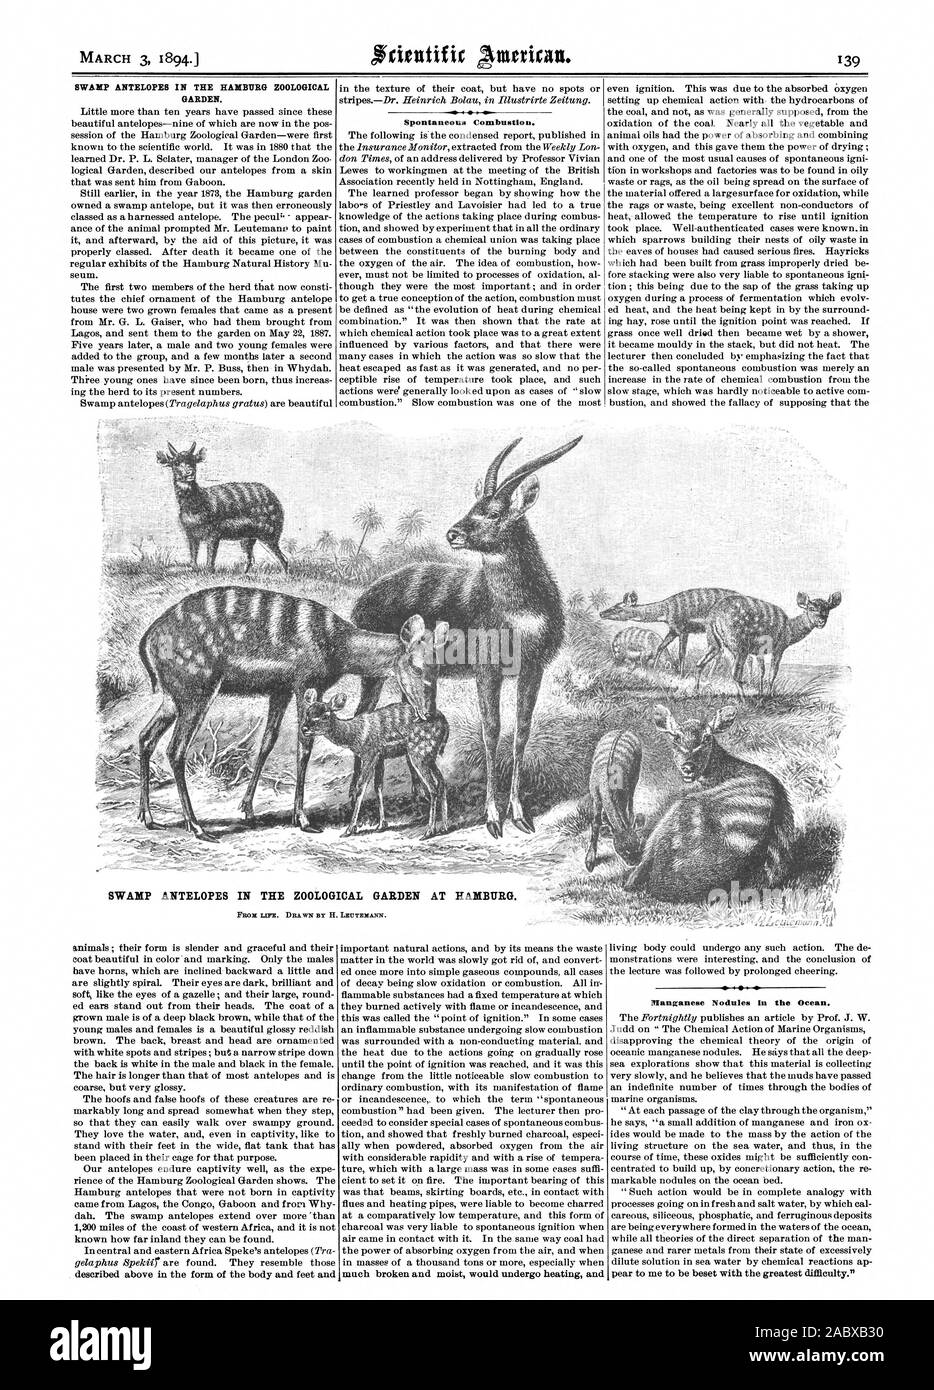 471 MARCH 3 1894. SWAMP ANTELOPES IN THE HAMBURG ZOOLOGICAL GARDEN. Spontaneous Combustion. Manganese Nodules in the Ocean., scientific american, 1894-03-03 Stock Photo